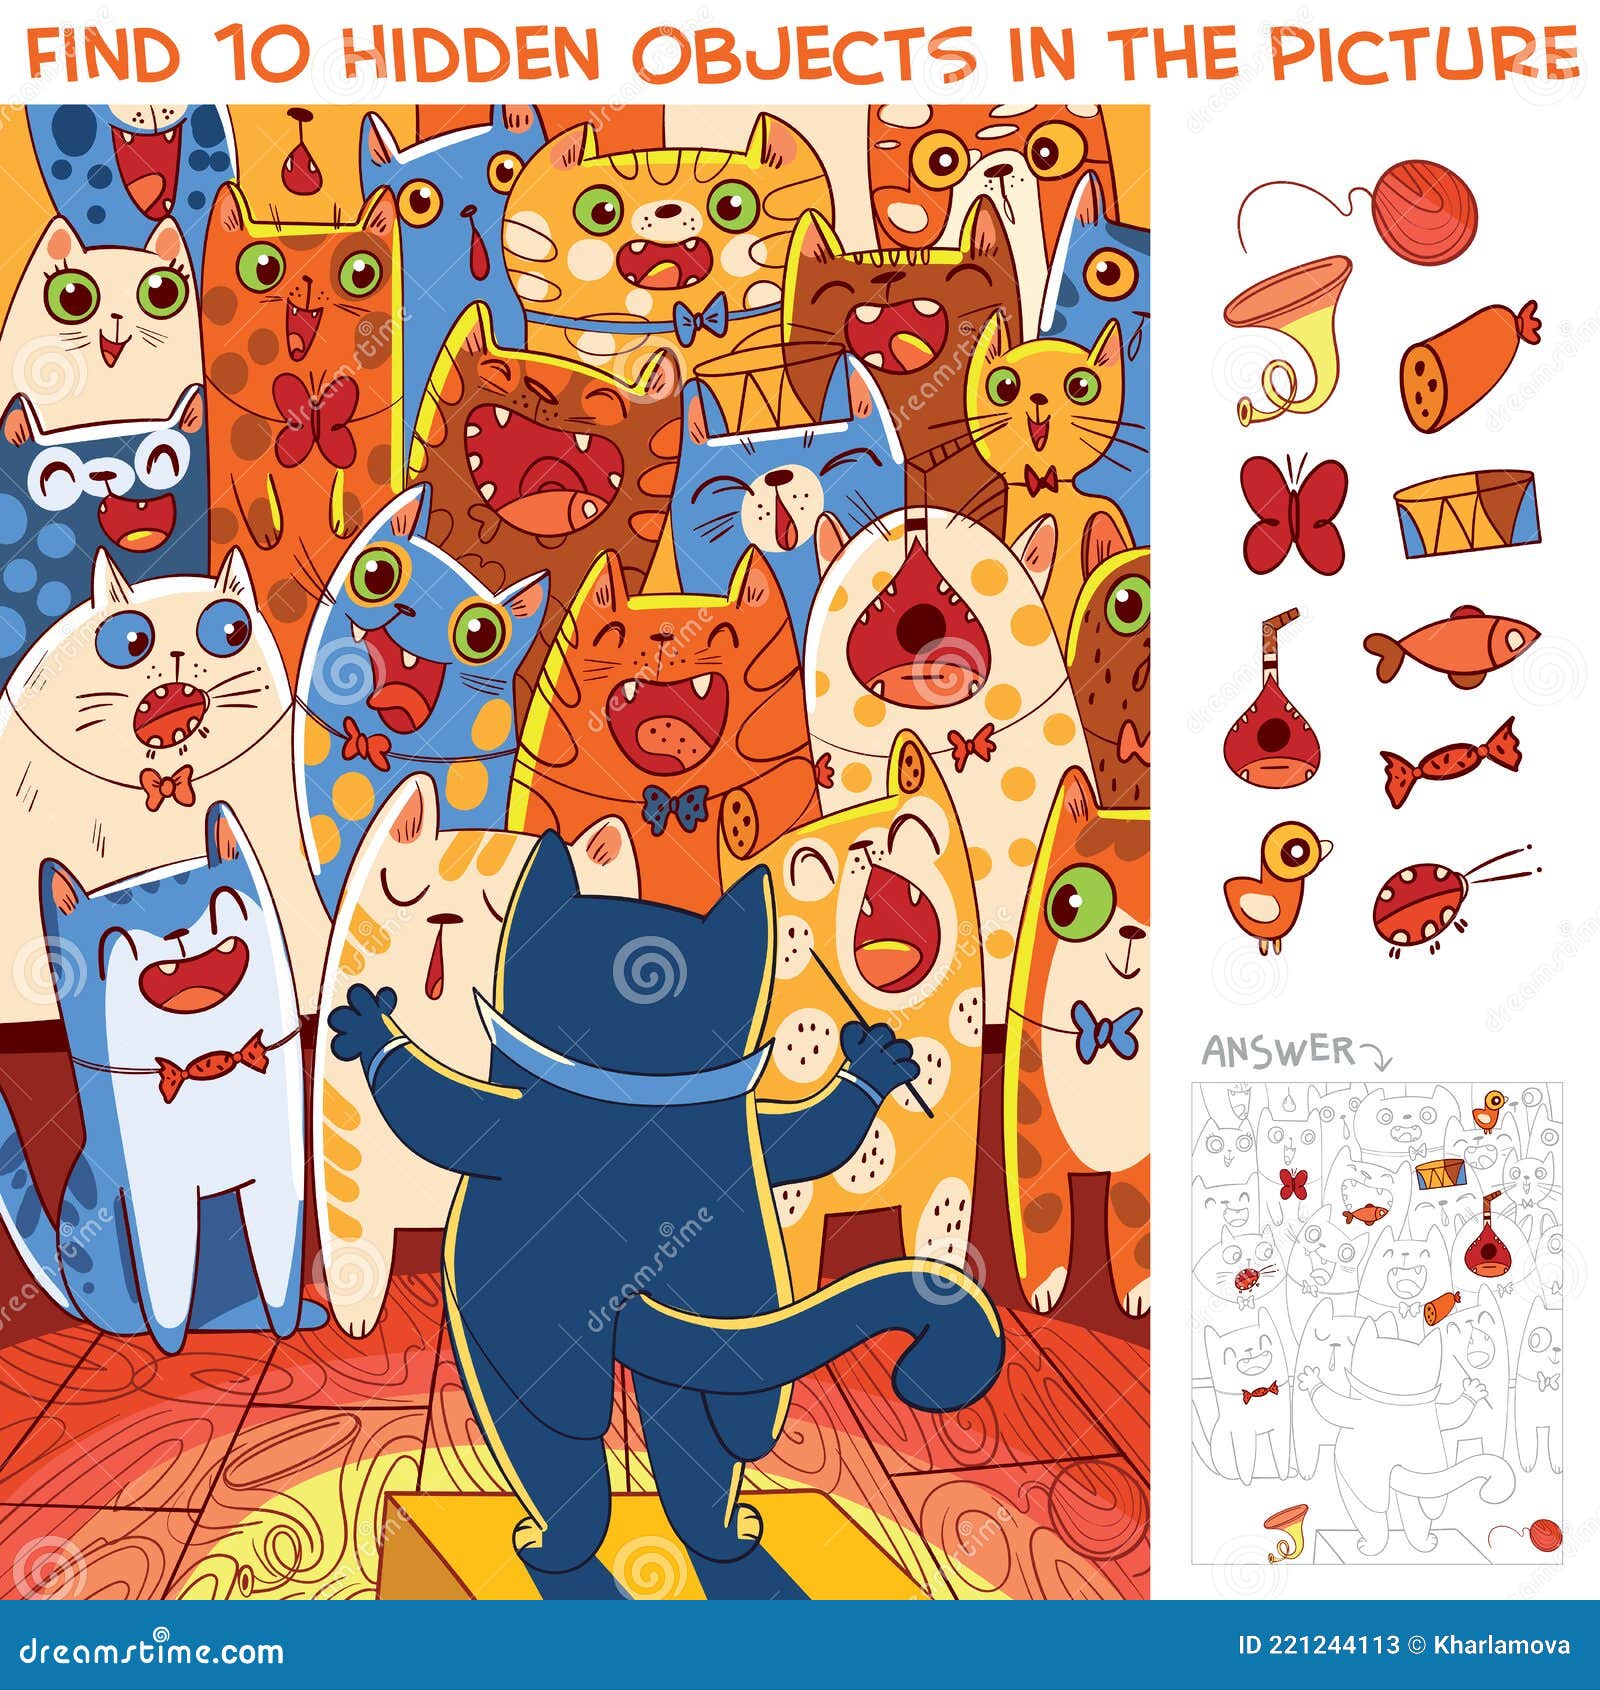 choir of cats with cat conductor. find 10 hidden objects